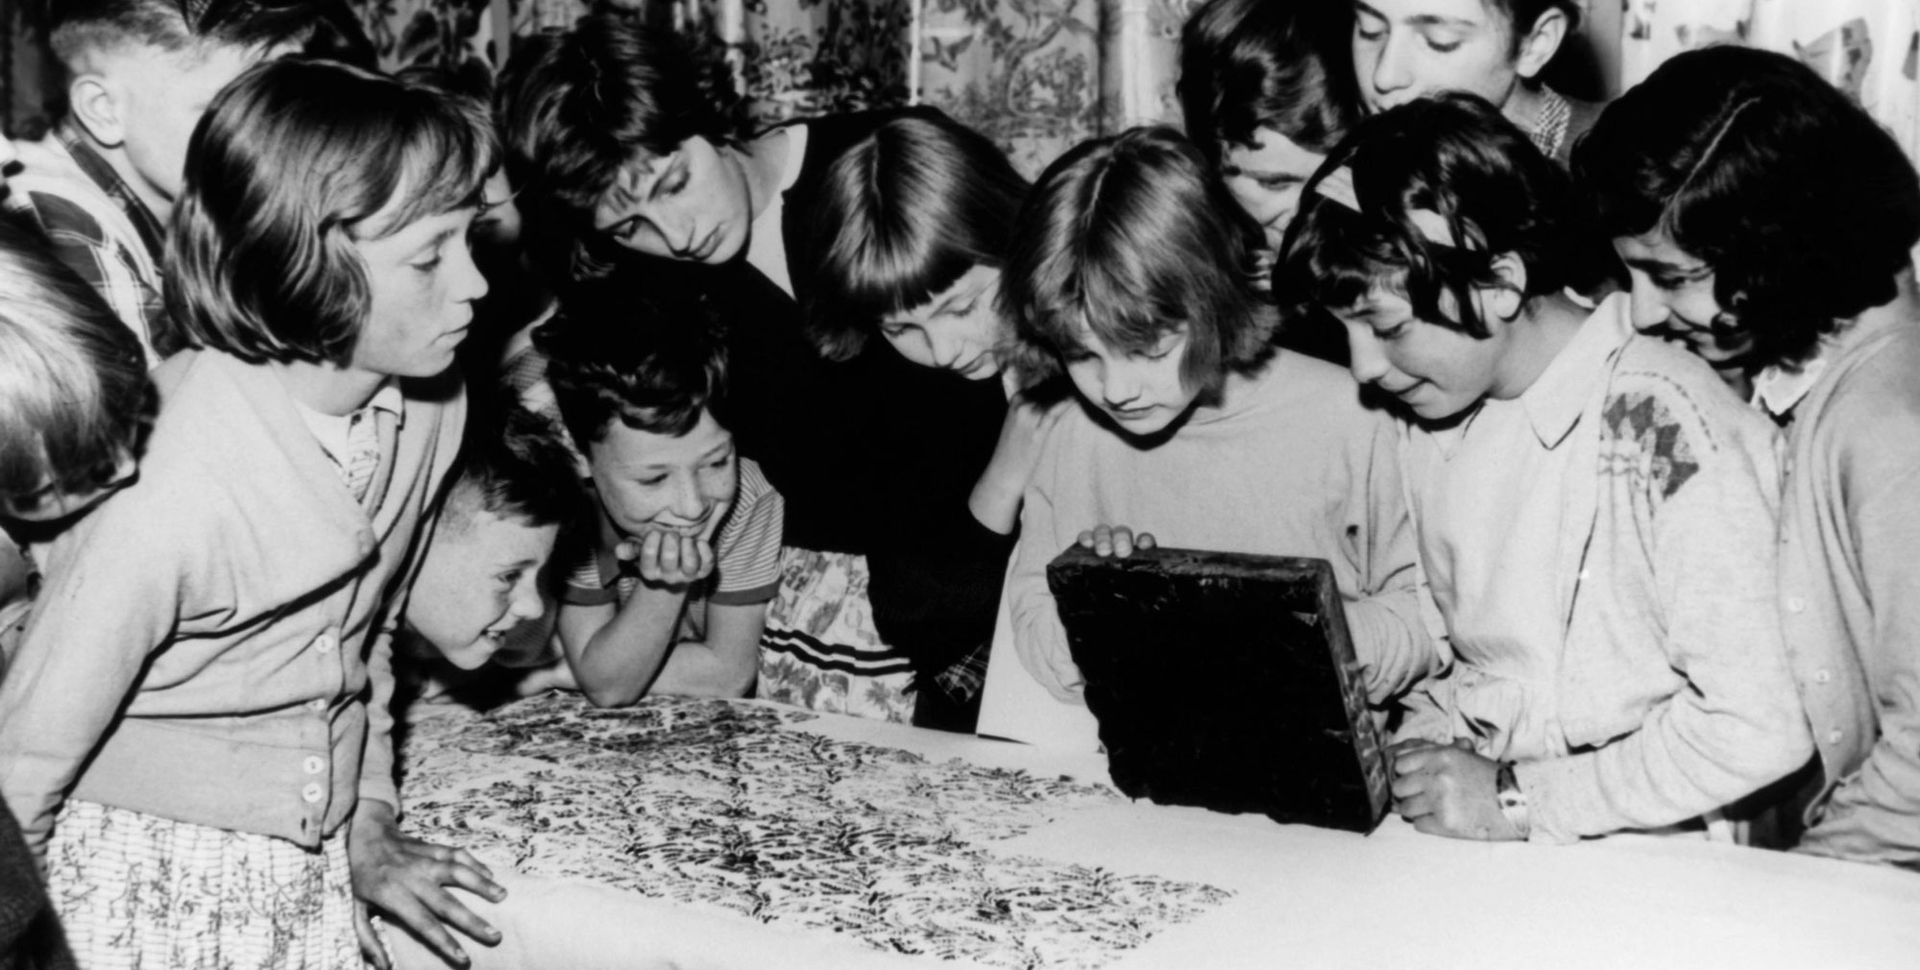 Children learning at the Geffrye Museum in London, around 1940 Courtesy of the Museum of the Home